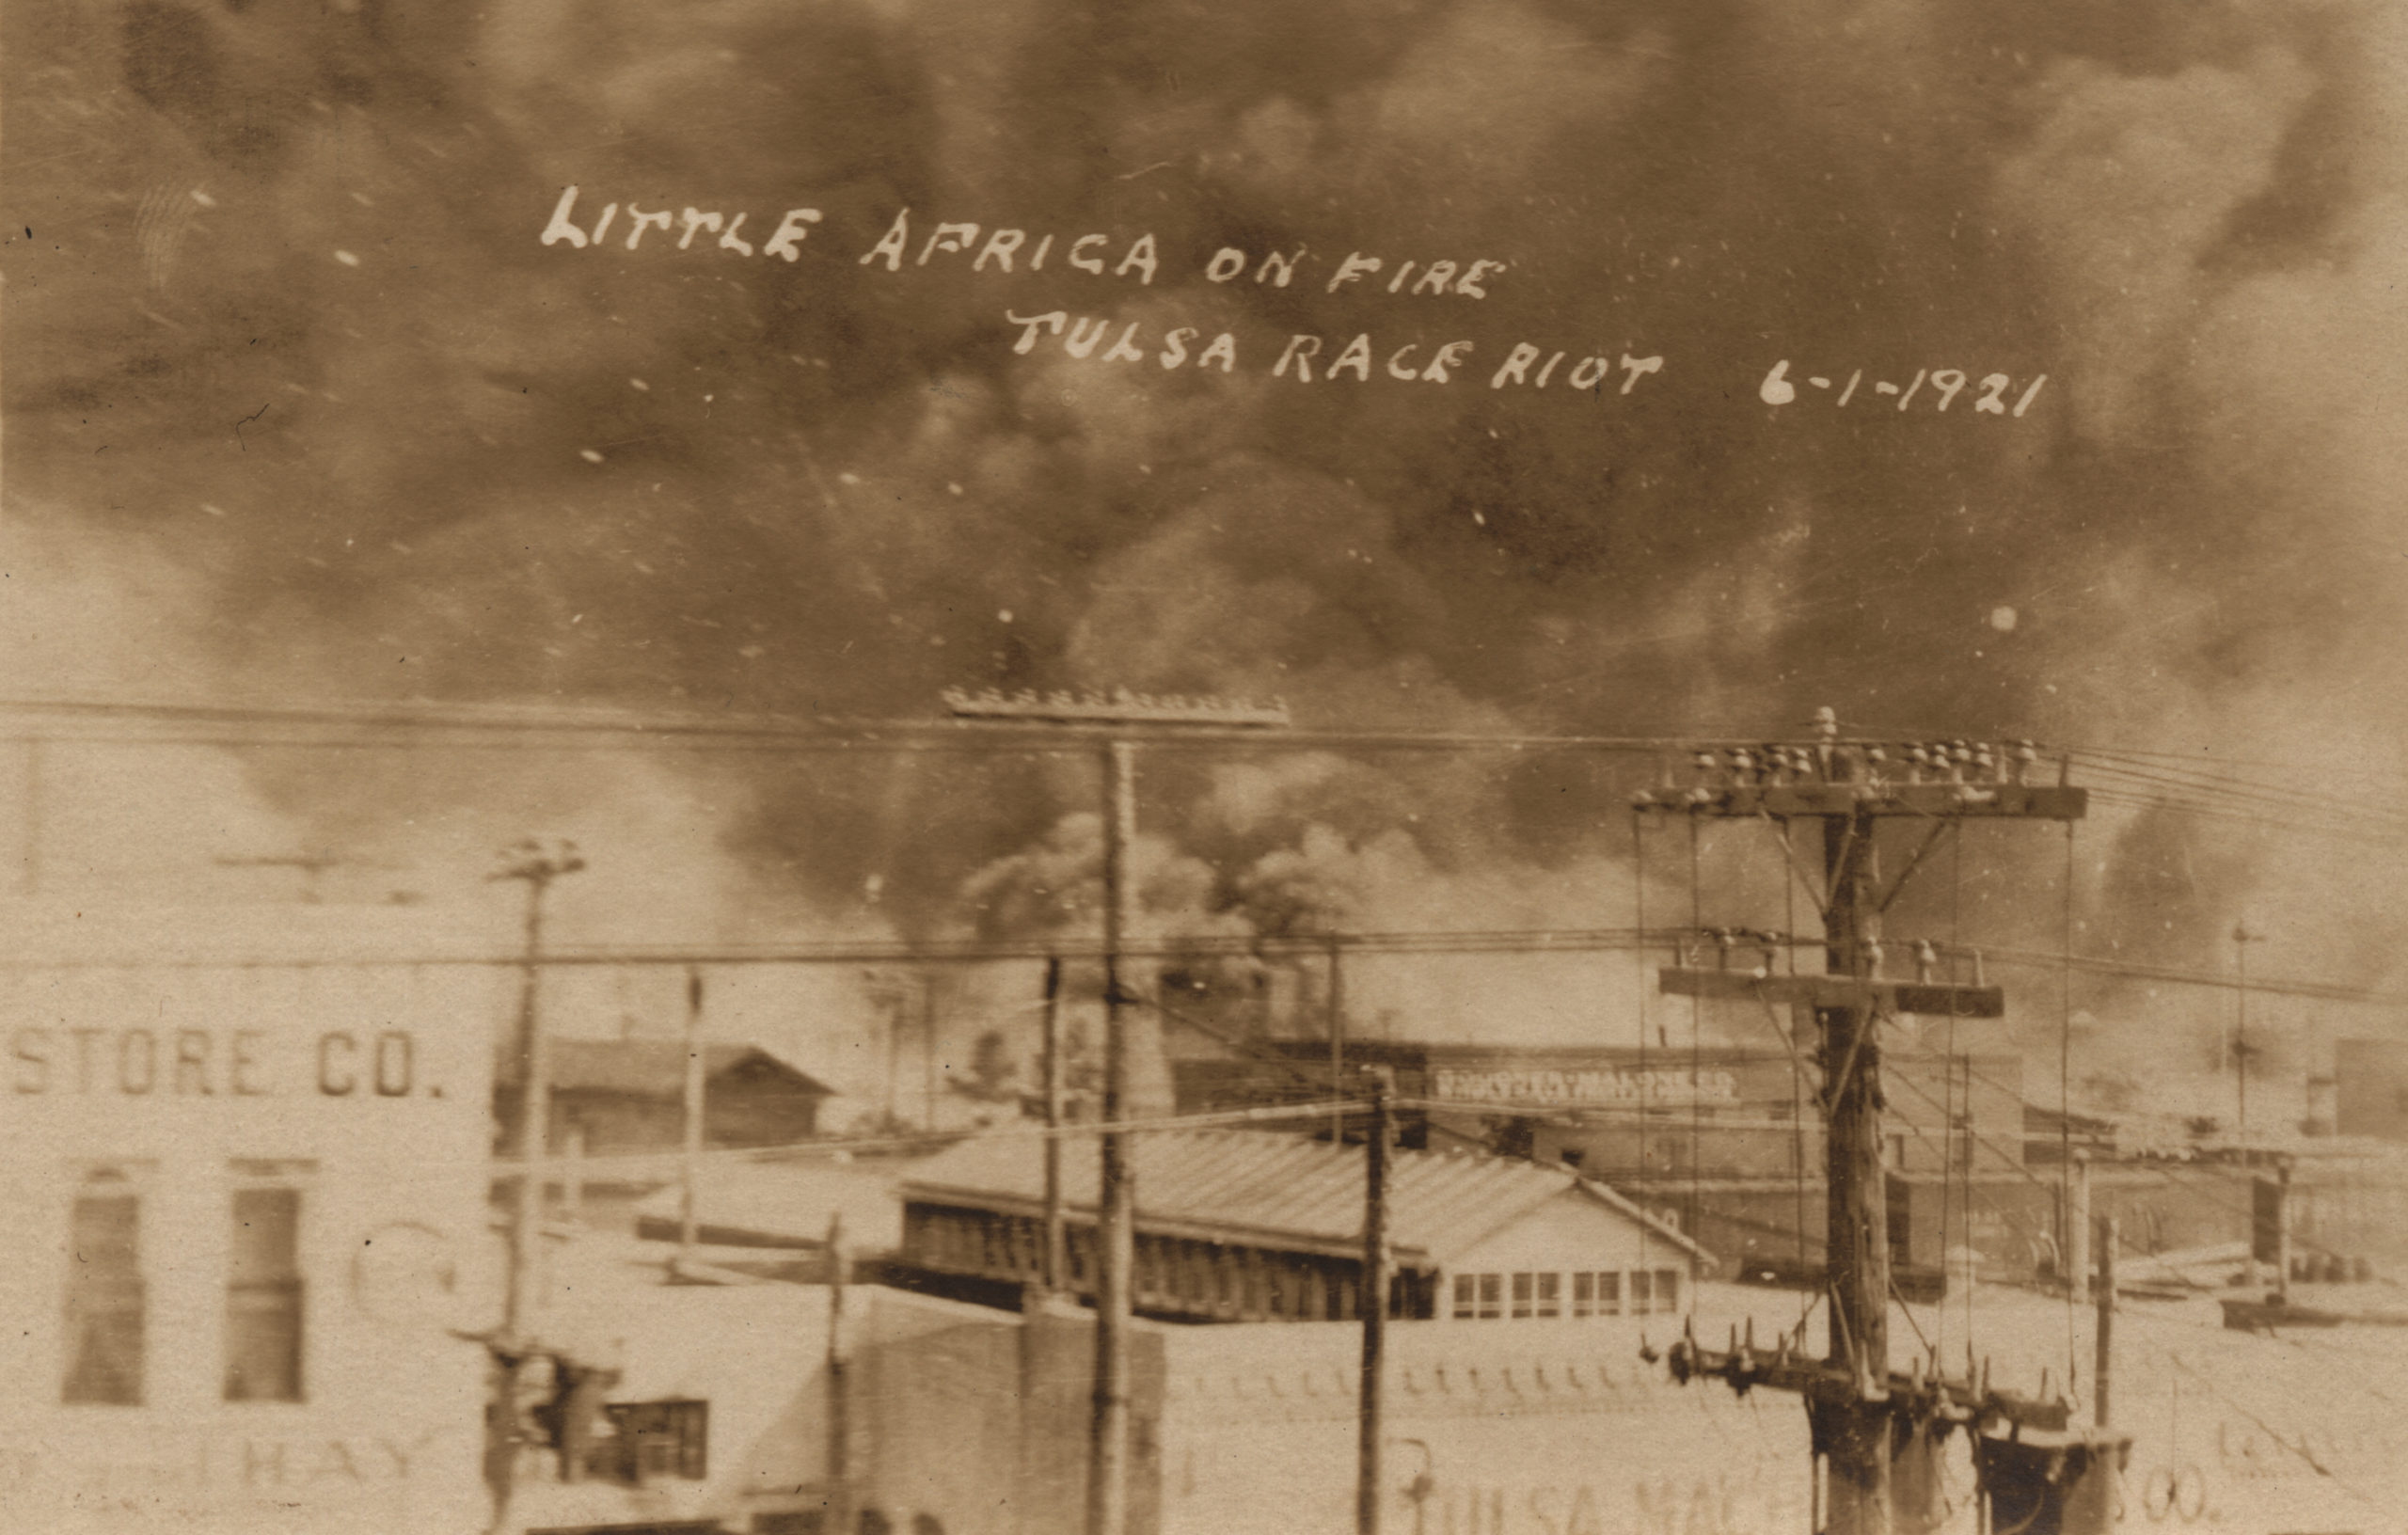 This photo on this postcard was taken from on top of the Santa Fe Freight office at 1st St. and Elgin Ave., showing the fires on Archer towards Greenwood. The Goodner-Malone company (1 N. Frankfurt Ave.) building is in the center of the photo.